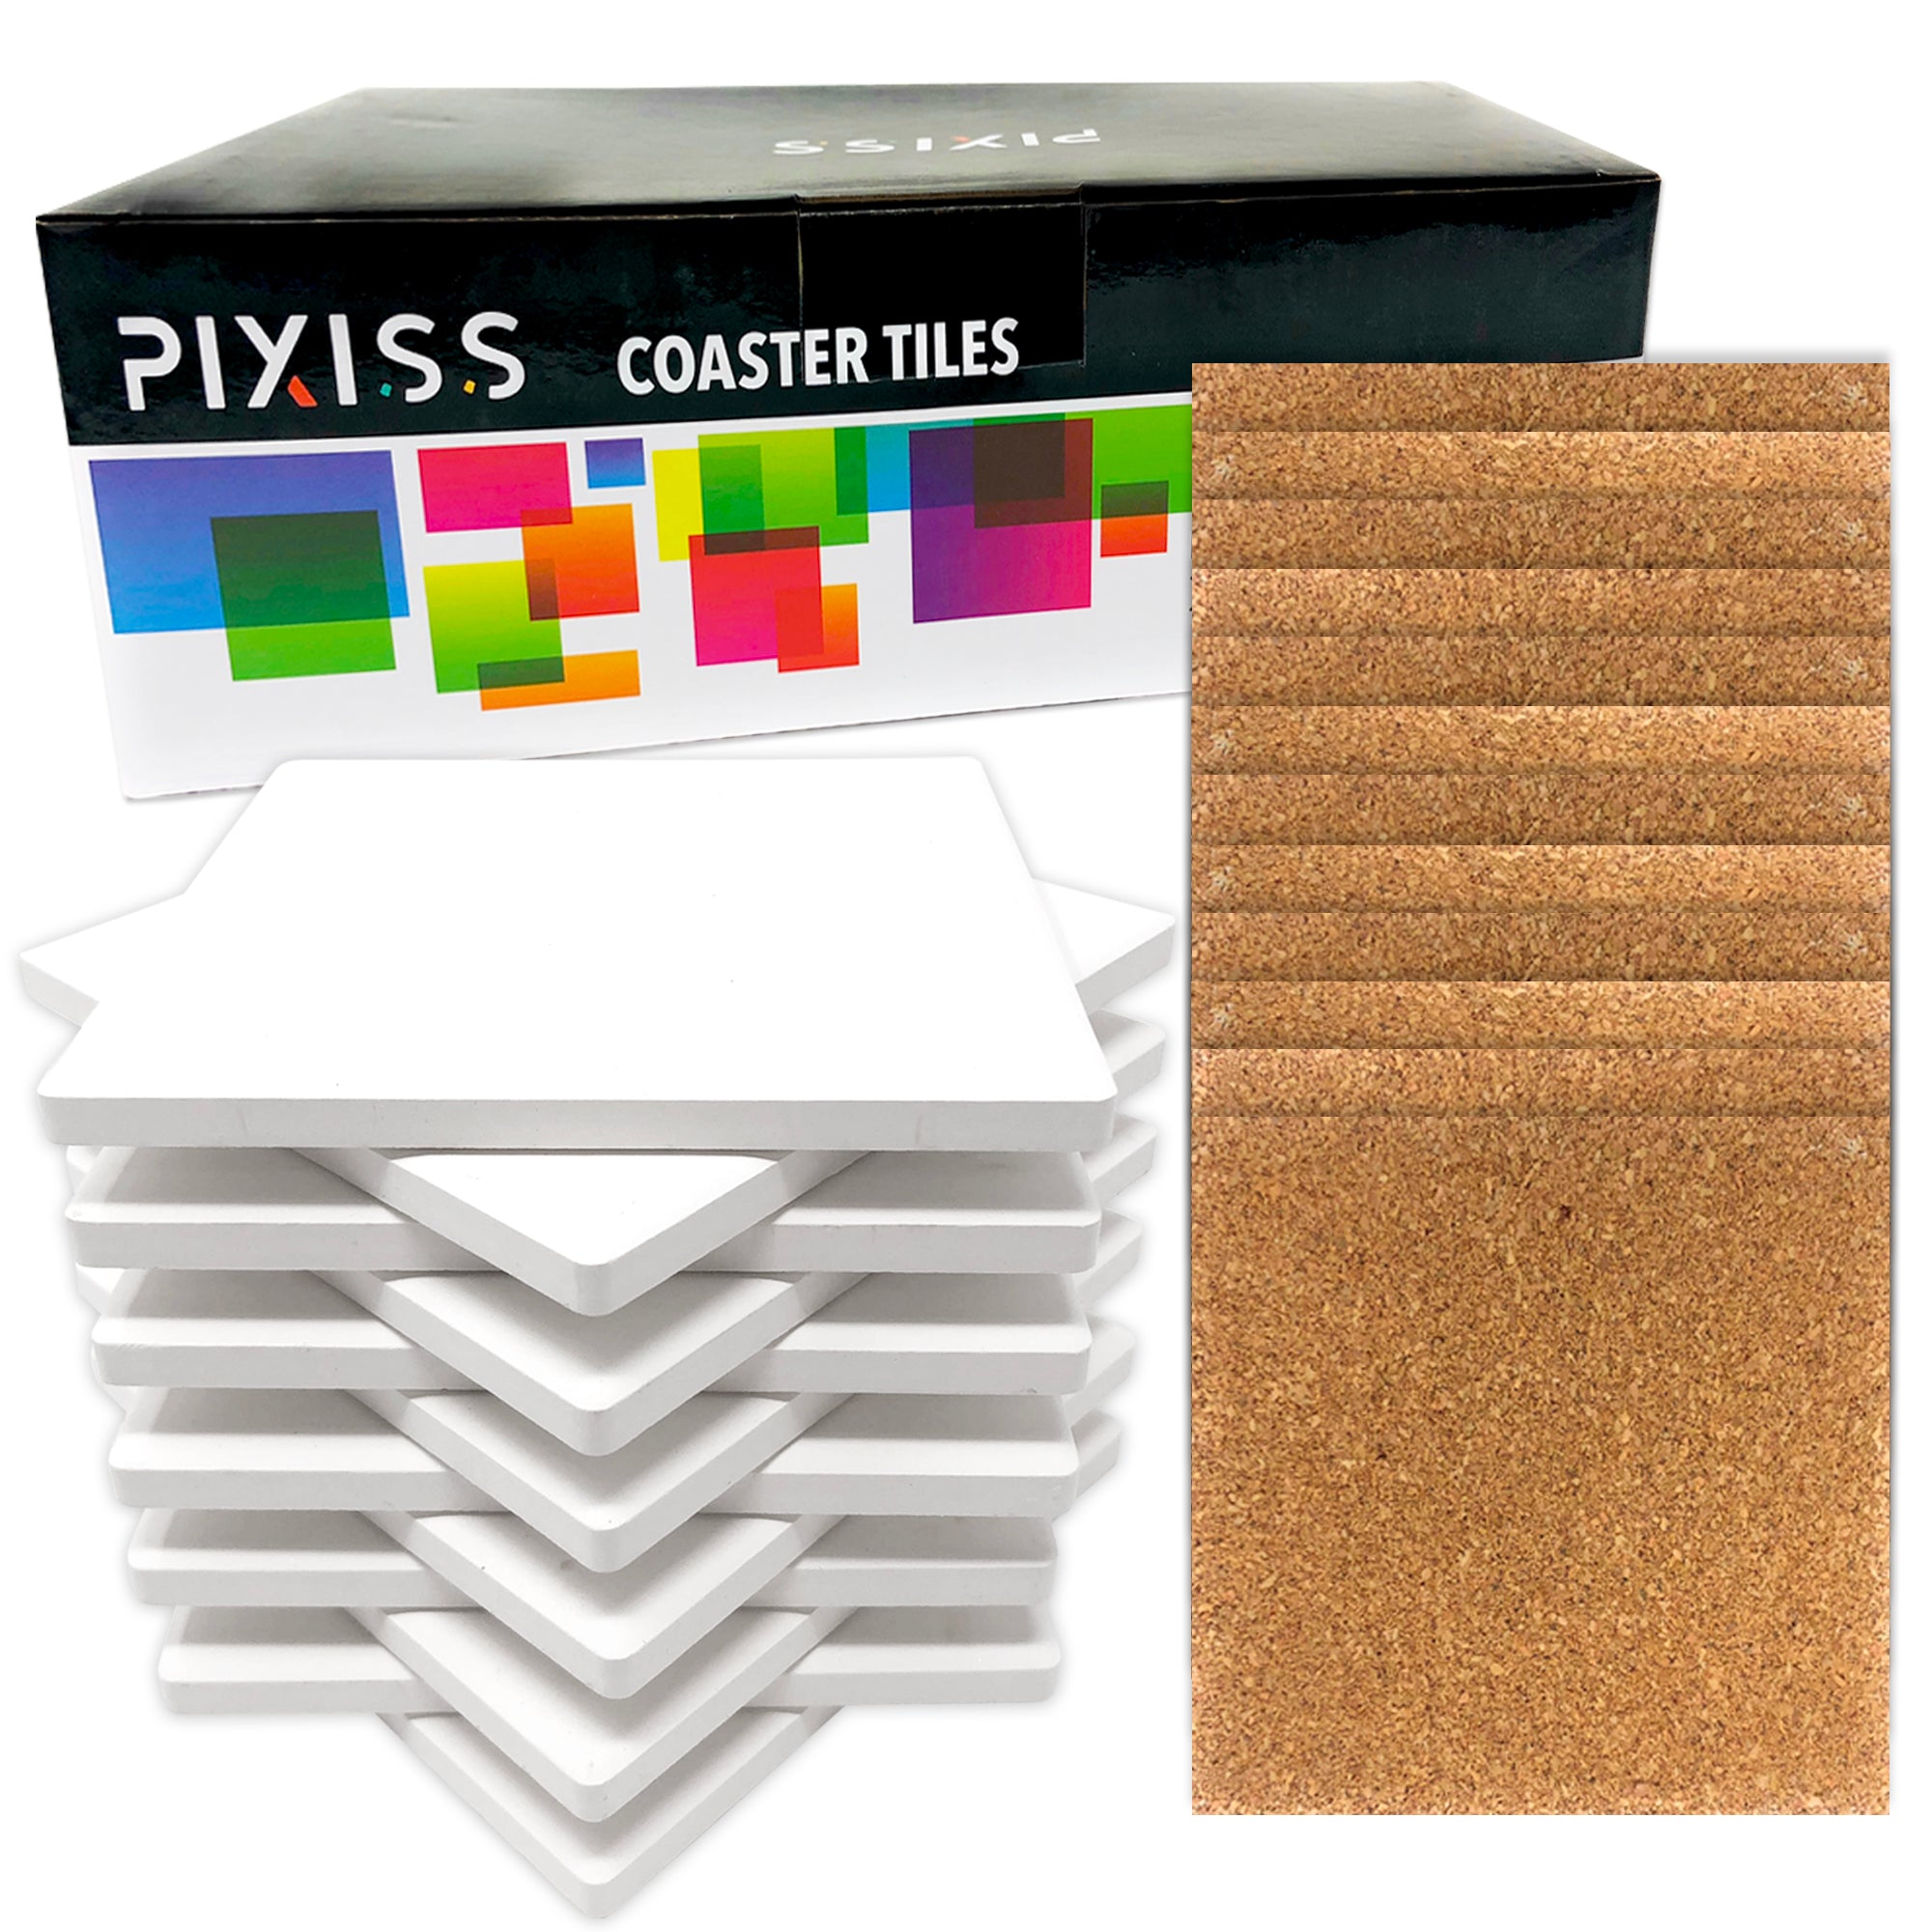 Pixiss Ceramic Tiles for Crafts Coasters,100 Square Ceramic White Tiles  4-Inch with Cork Backing Pads, for Alcohol Ink or Acrylic Pouring, DIY Make